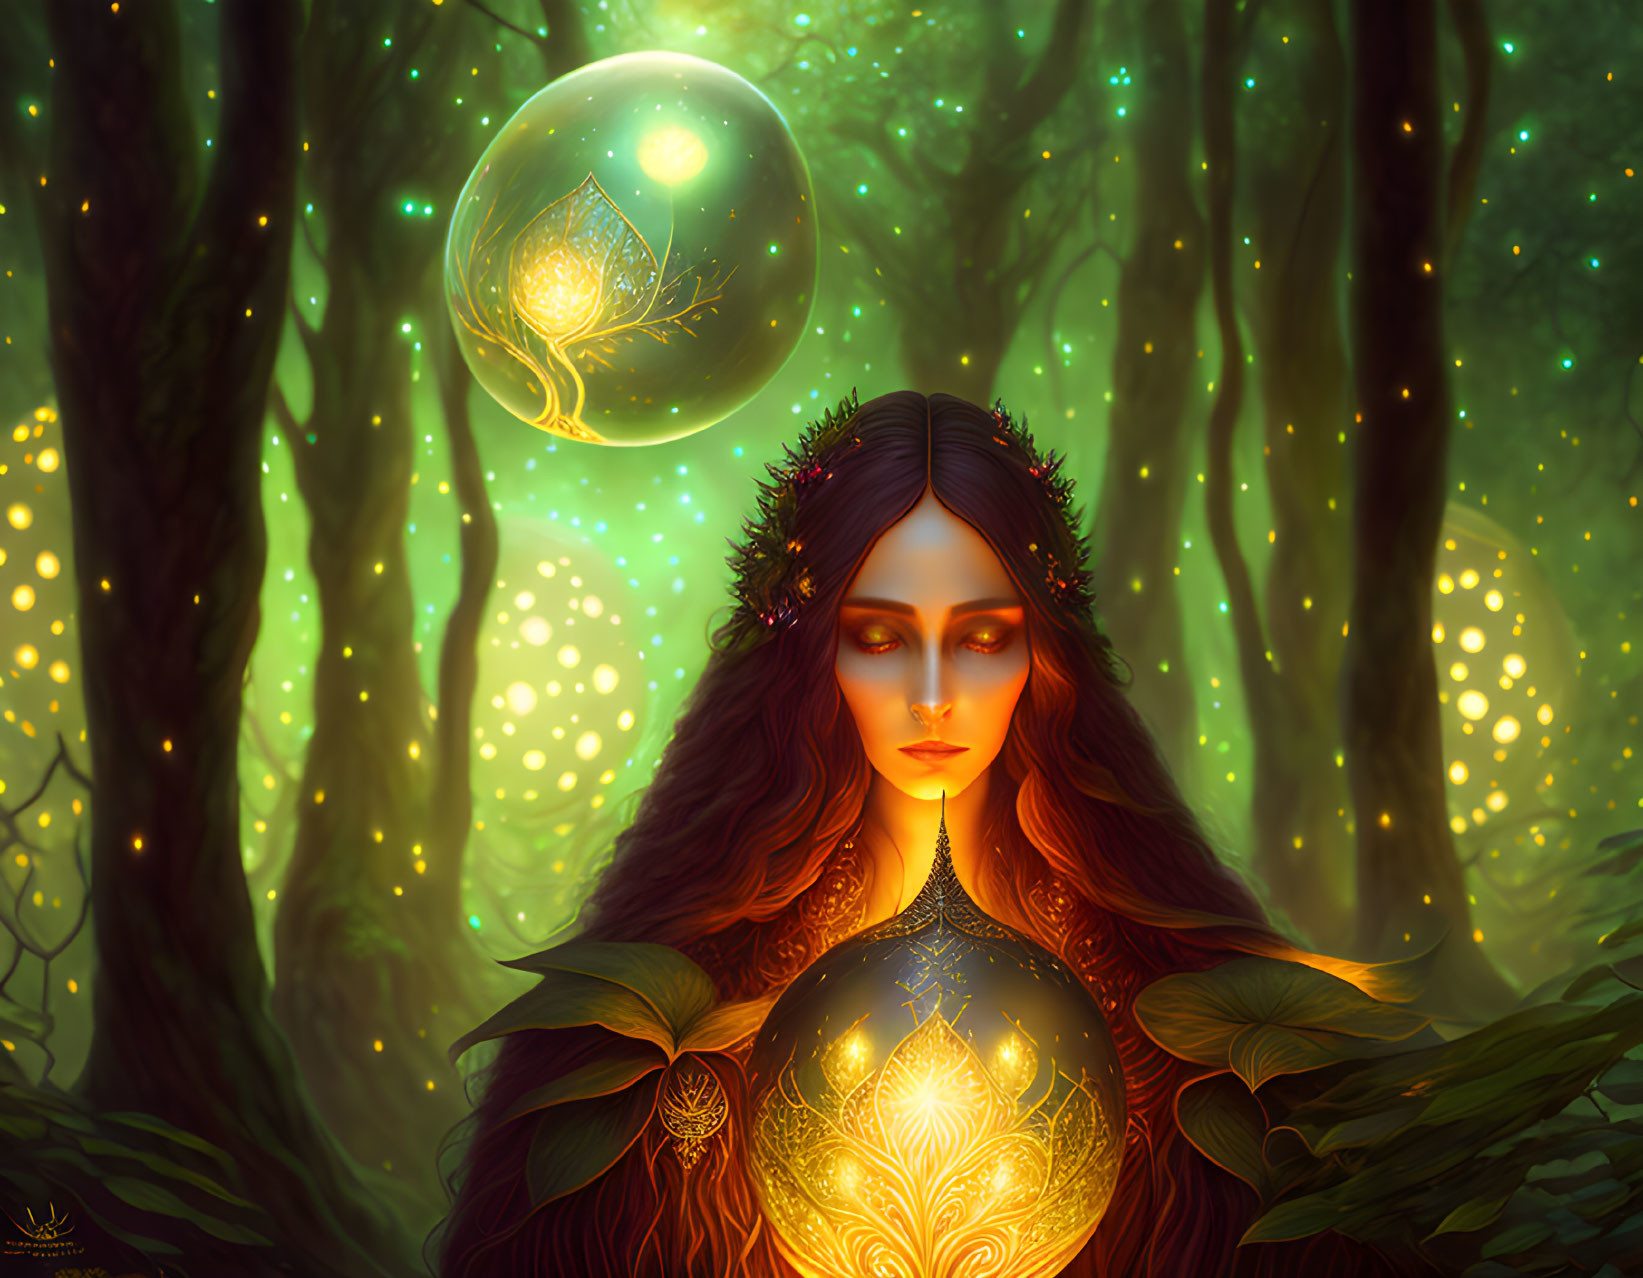 Mystical female figure with glowing orbs in enchanted forest